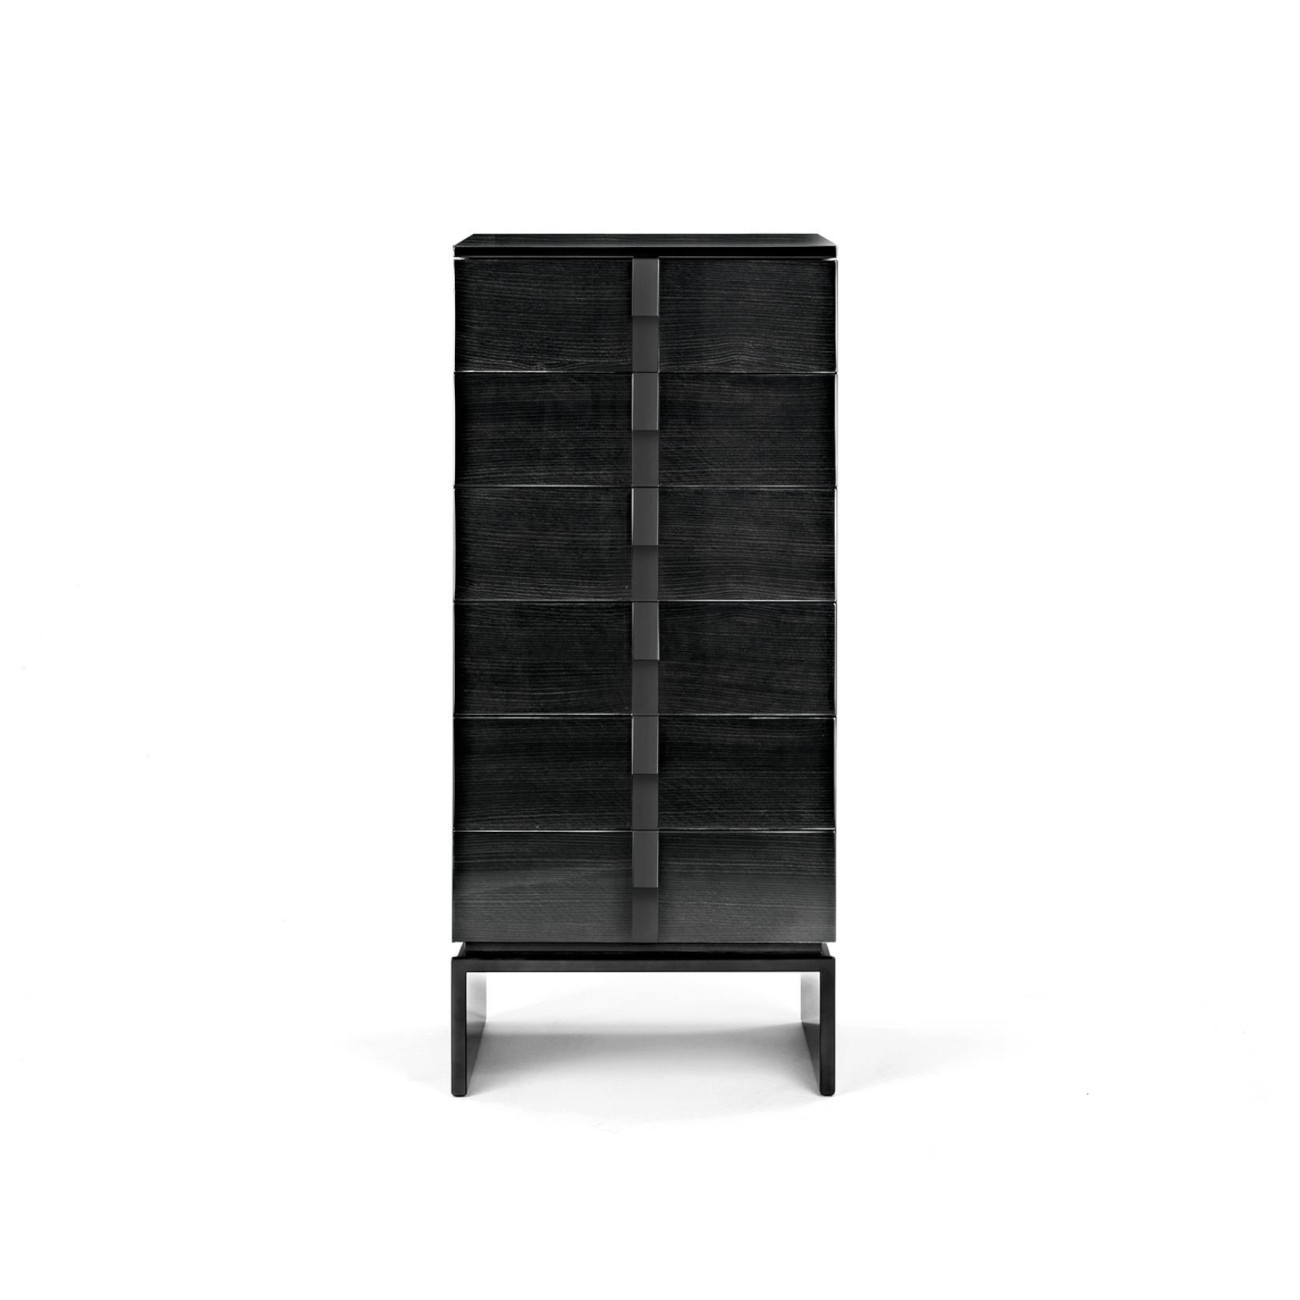 Chest of Drawers Black & More Malerba